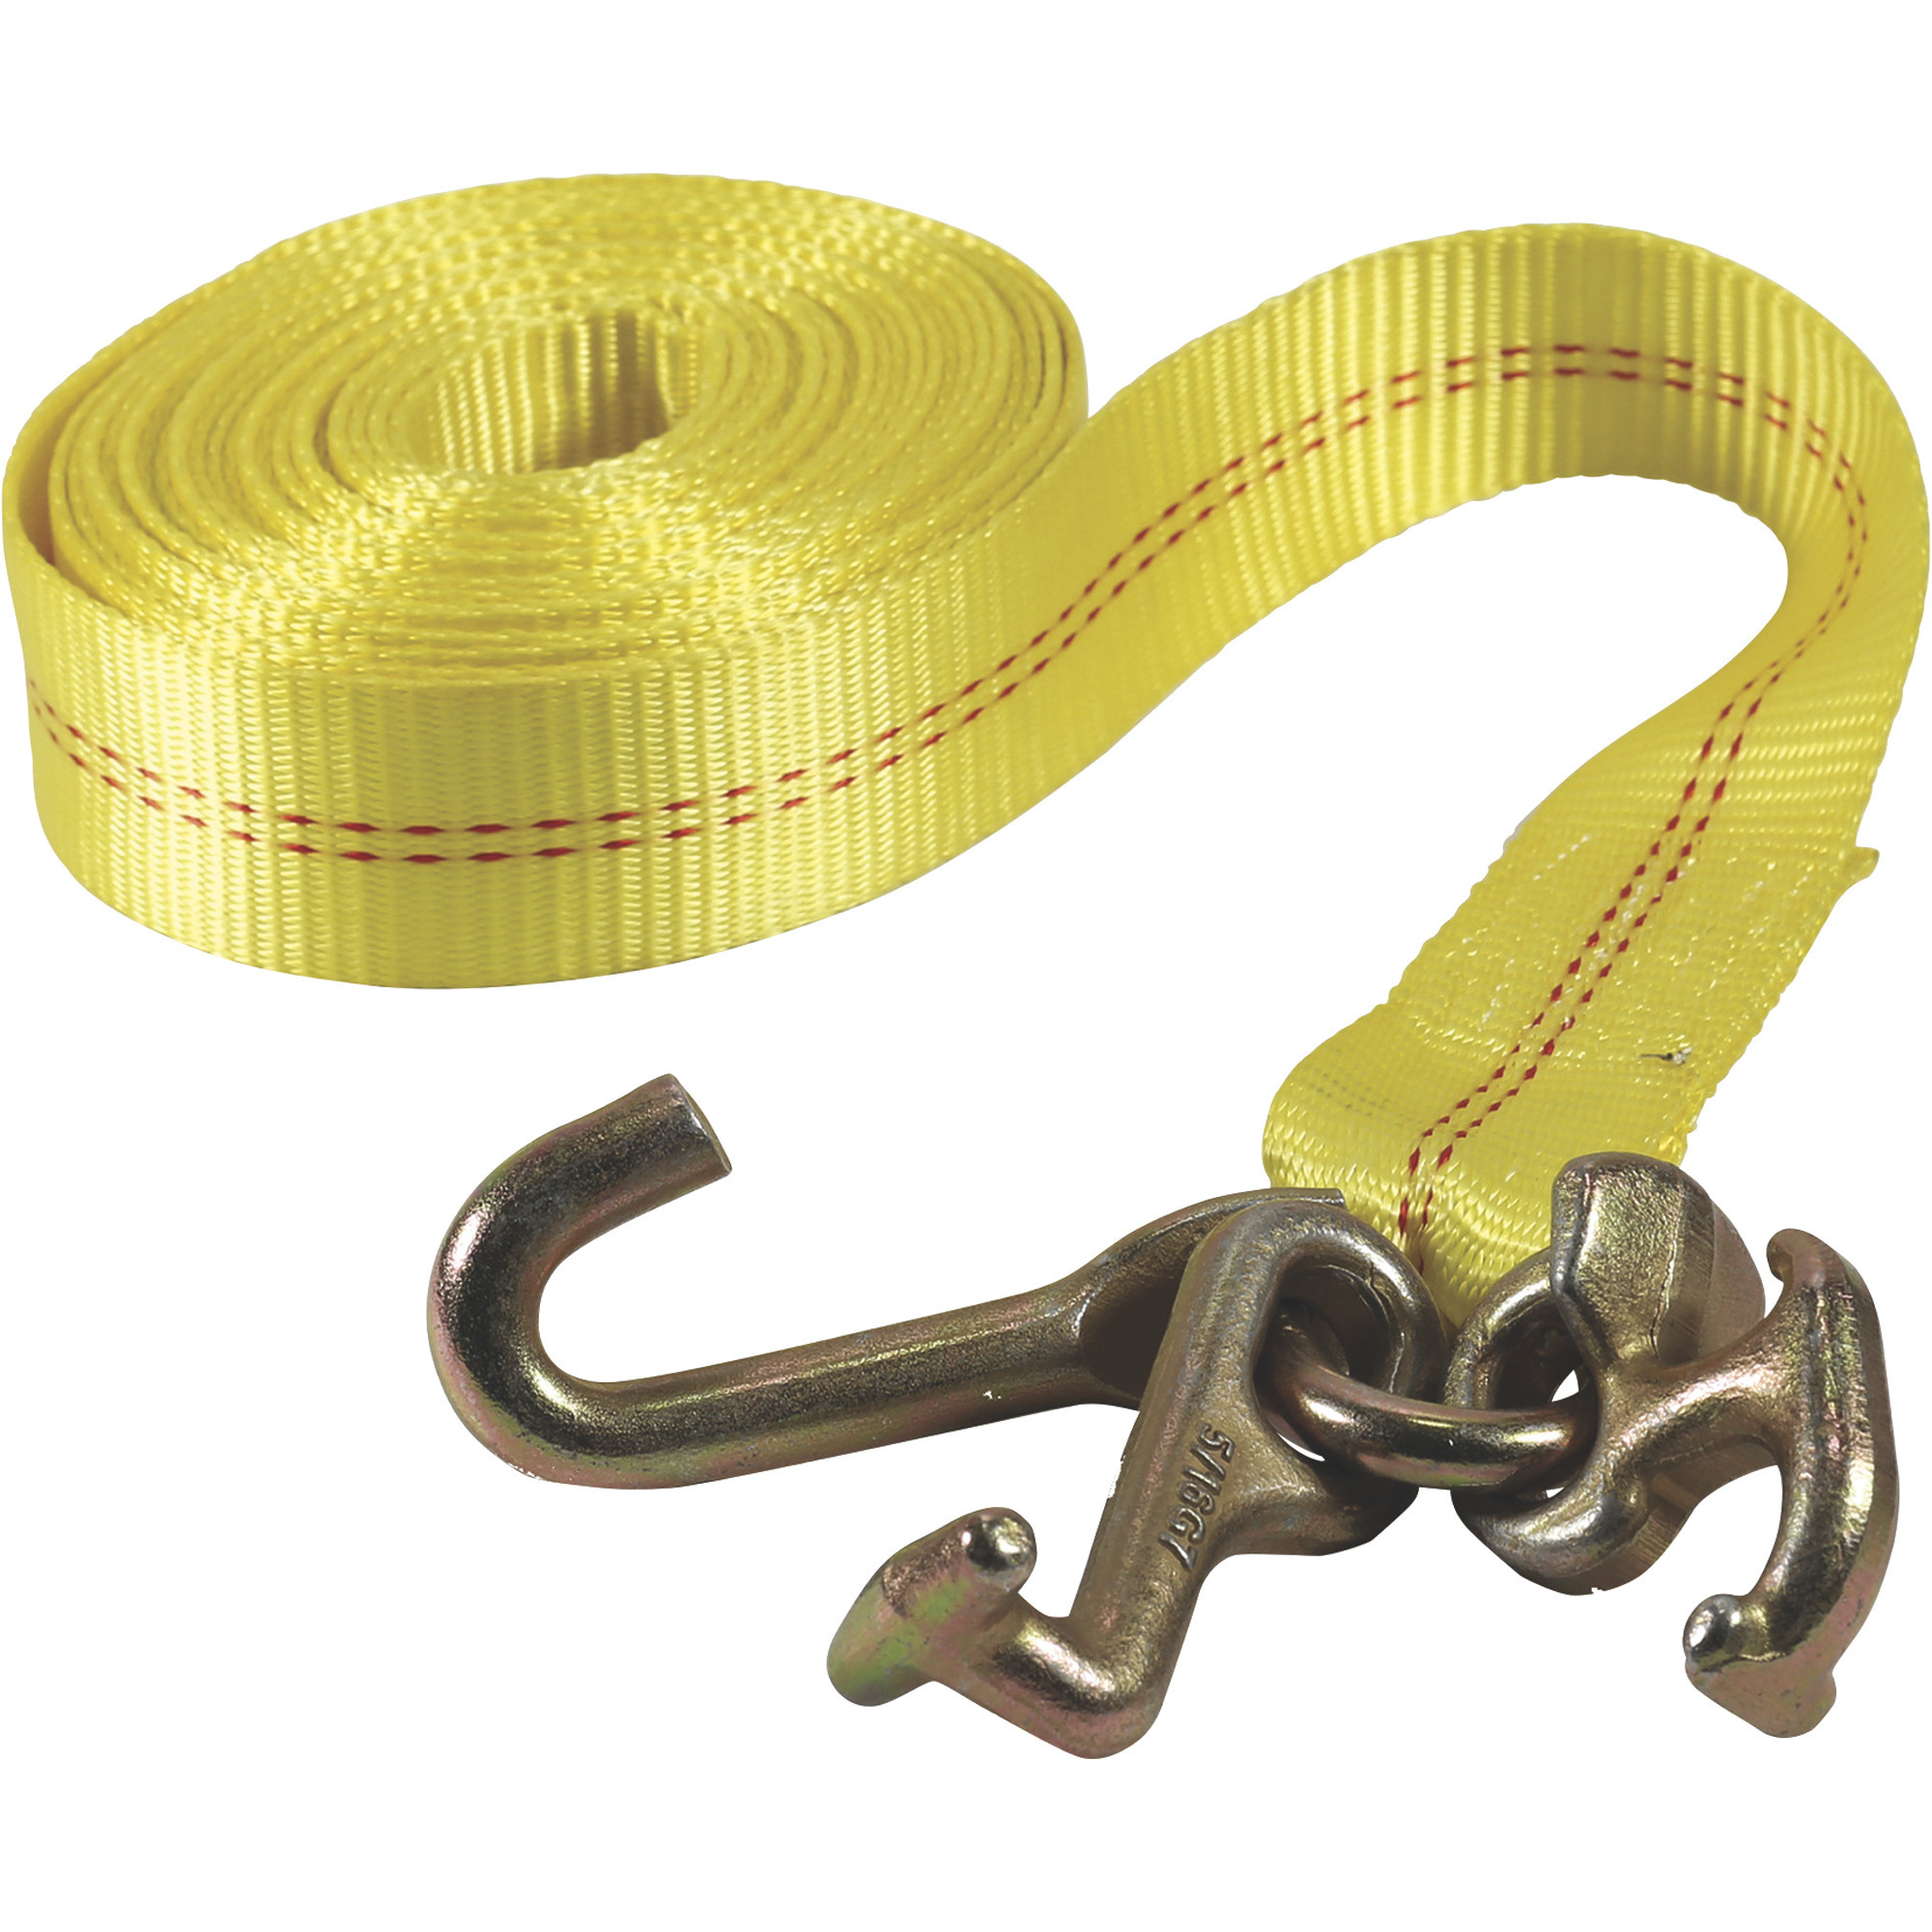 SmartStraps Ratchet Tie-Down Strap, 2Inch x 27ft., with Cluster Hooks, 10,000-Lb. Breaking Strength, Model 4553